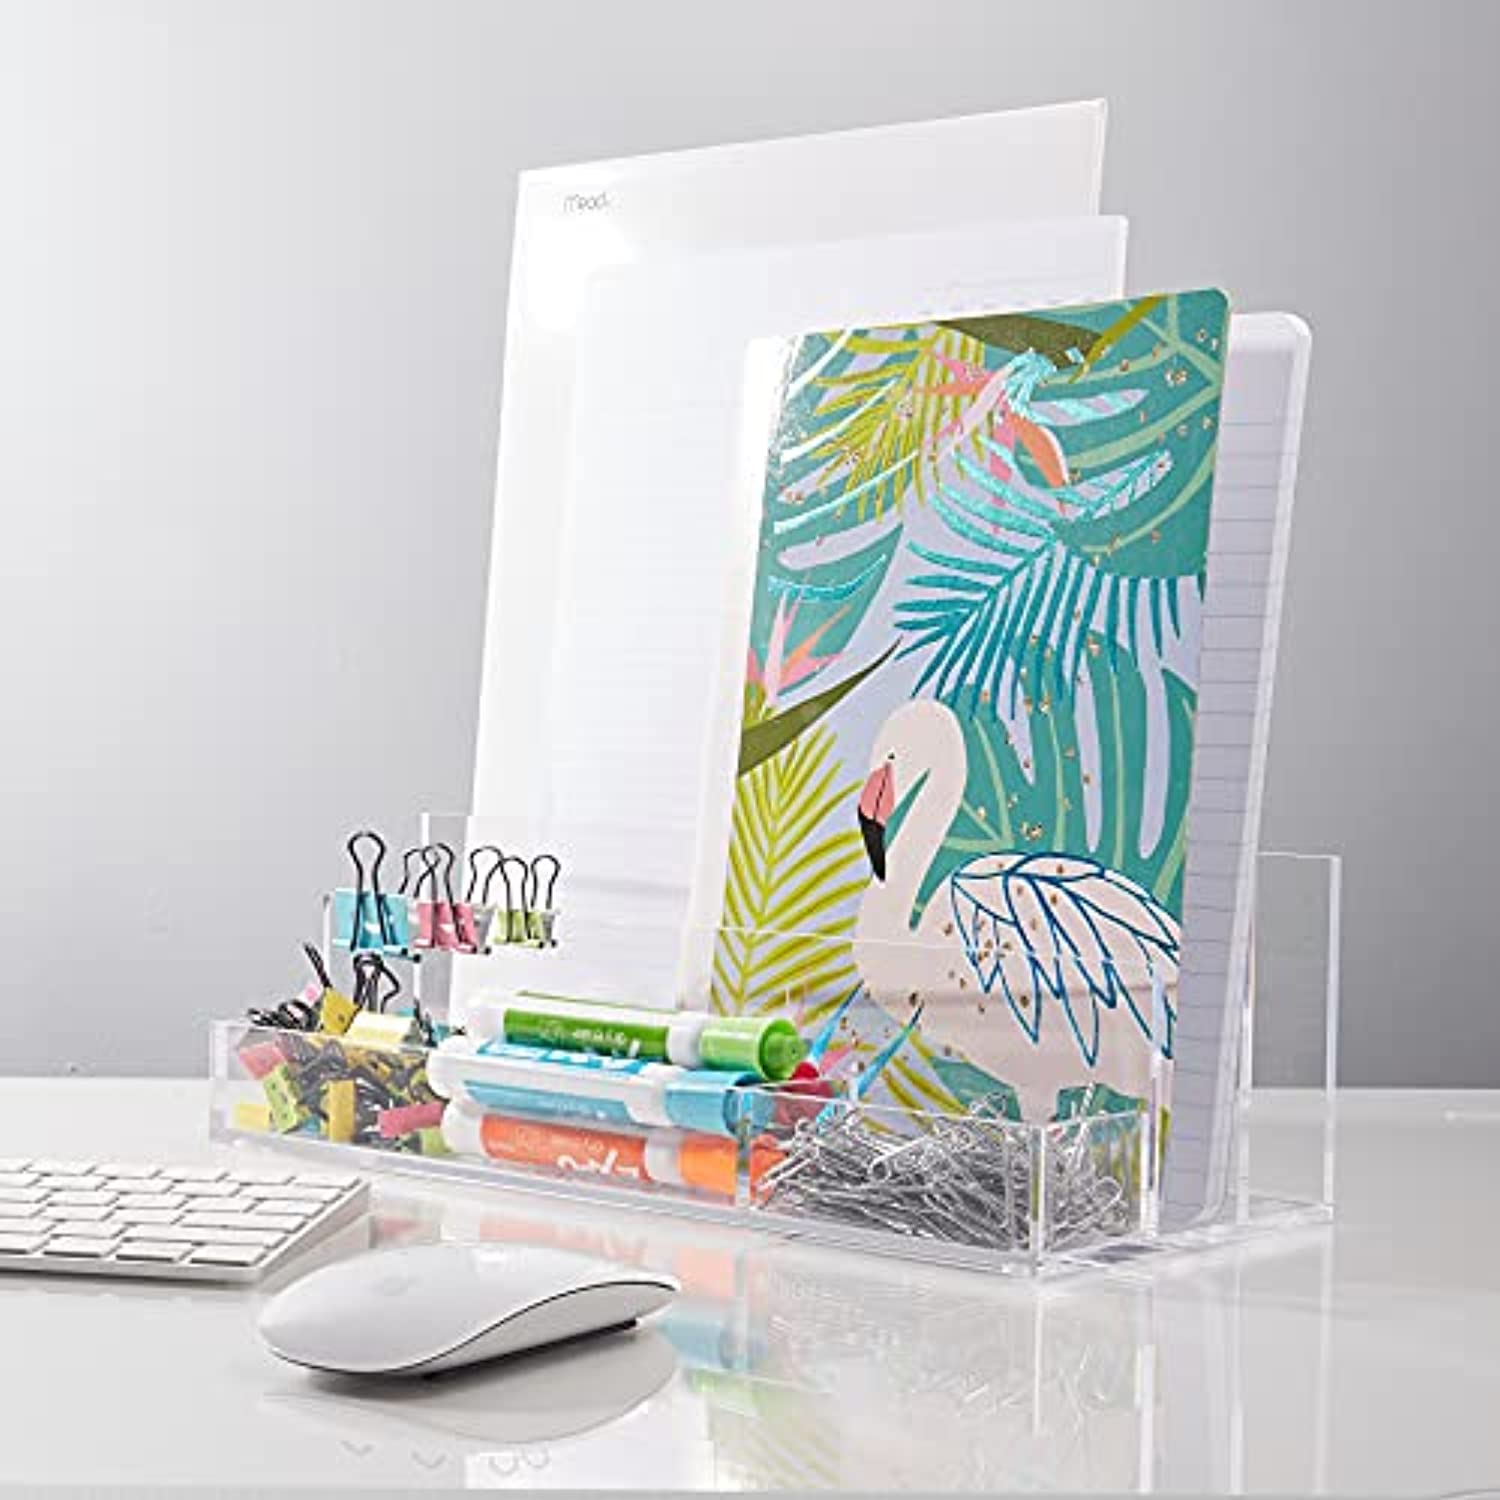 Acrylic Desk Organizer for Office Supplies and Desk Accessories, 12.5